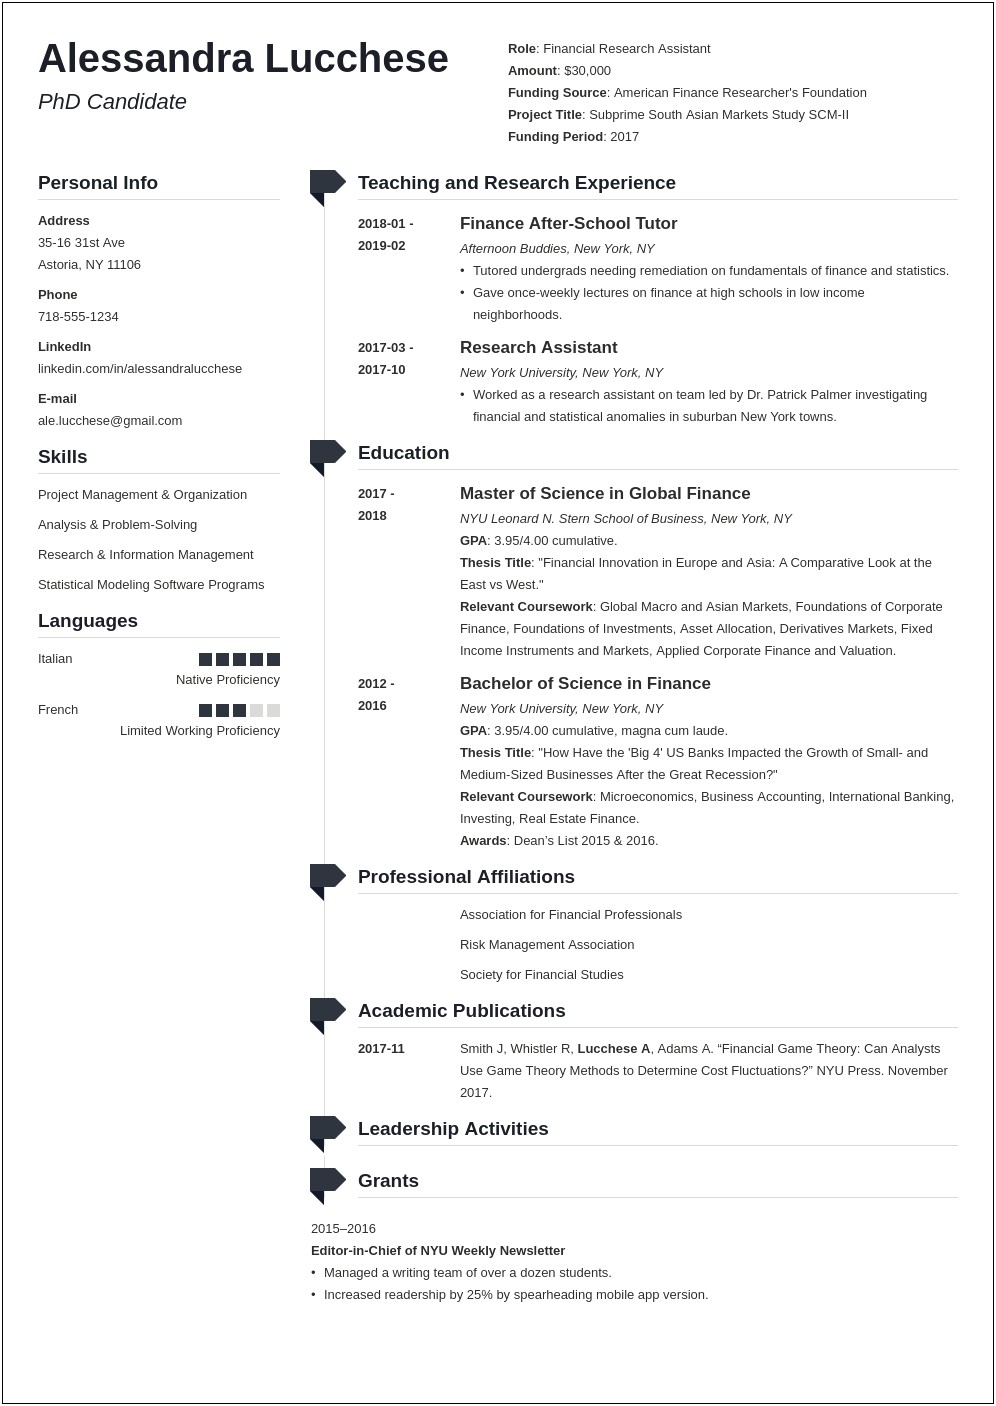 Sample Resume For Admission To Graduate School